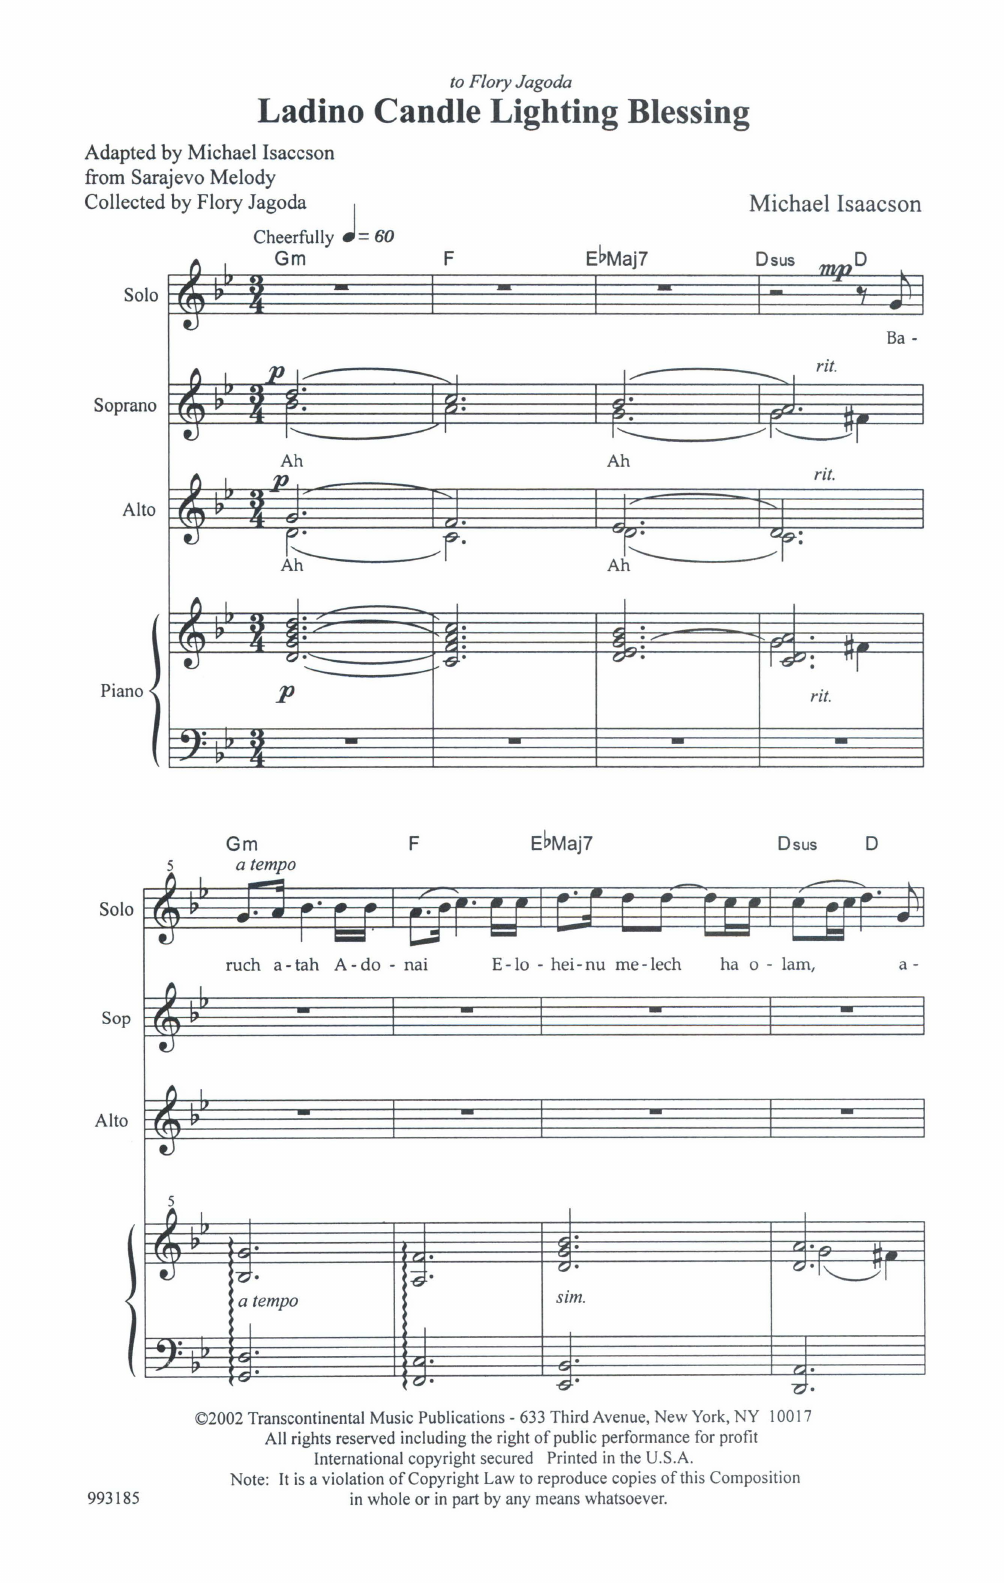 Download Michael Isaacson Ladino Candle Blessing Sheet Music